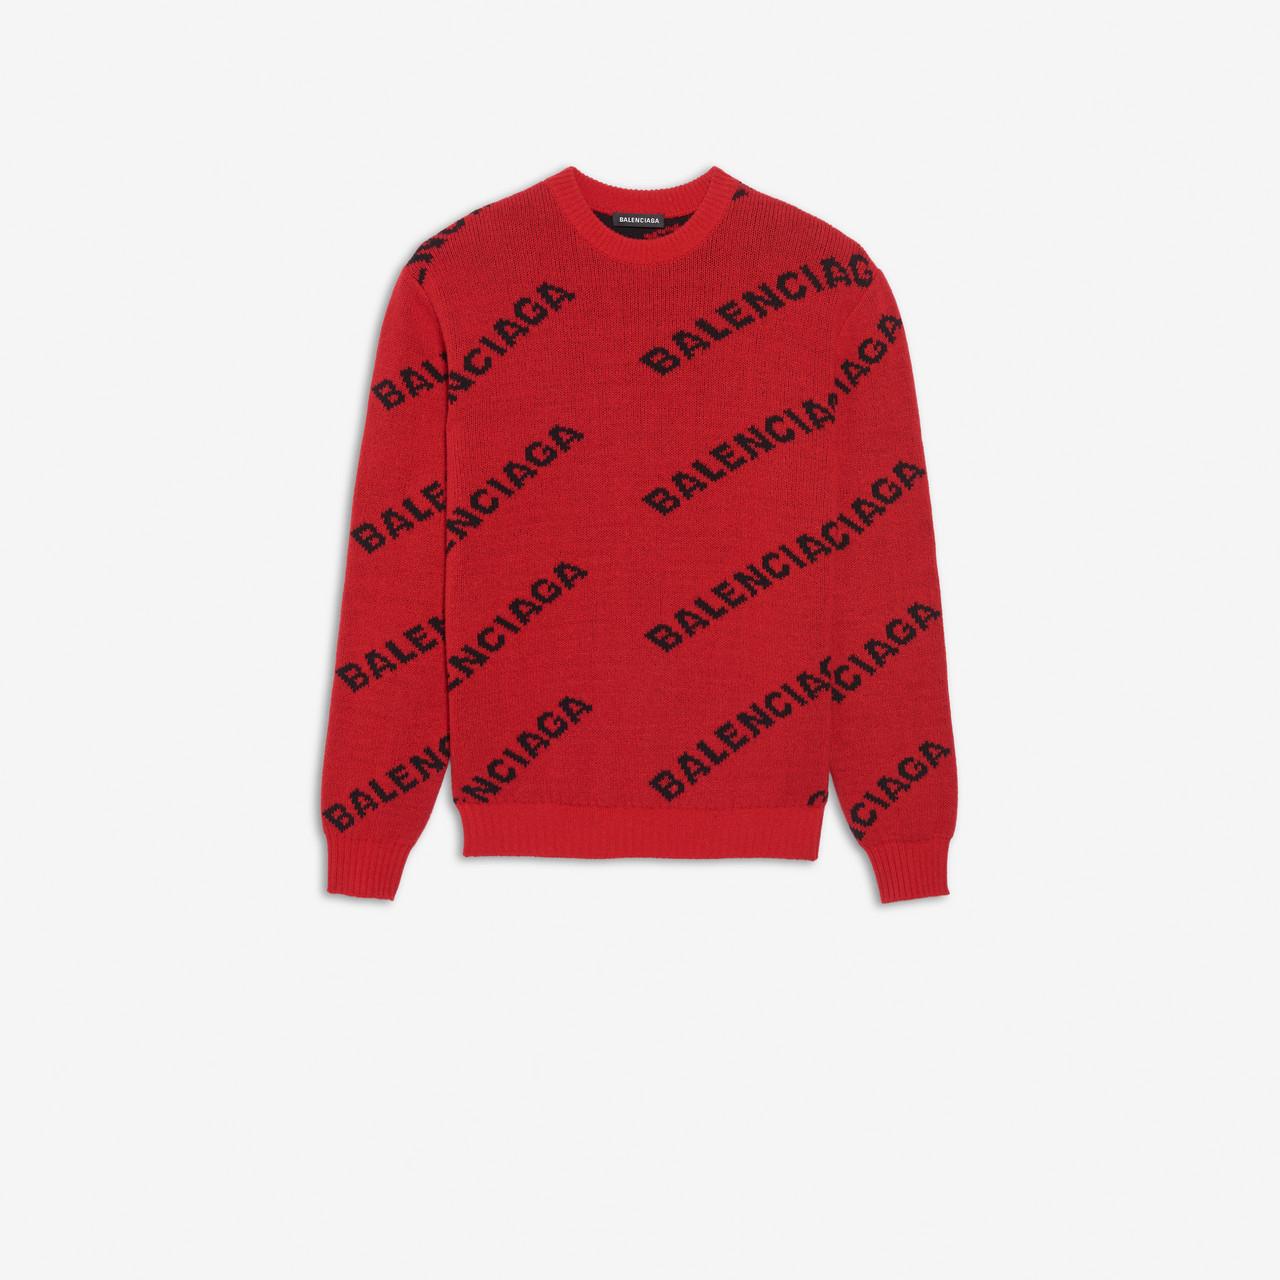 Balenciaga Red Wool Sweater for Men - Save 30% - Lyst